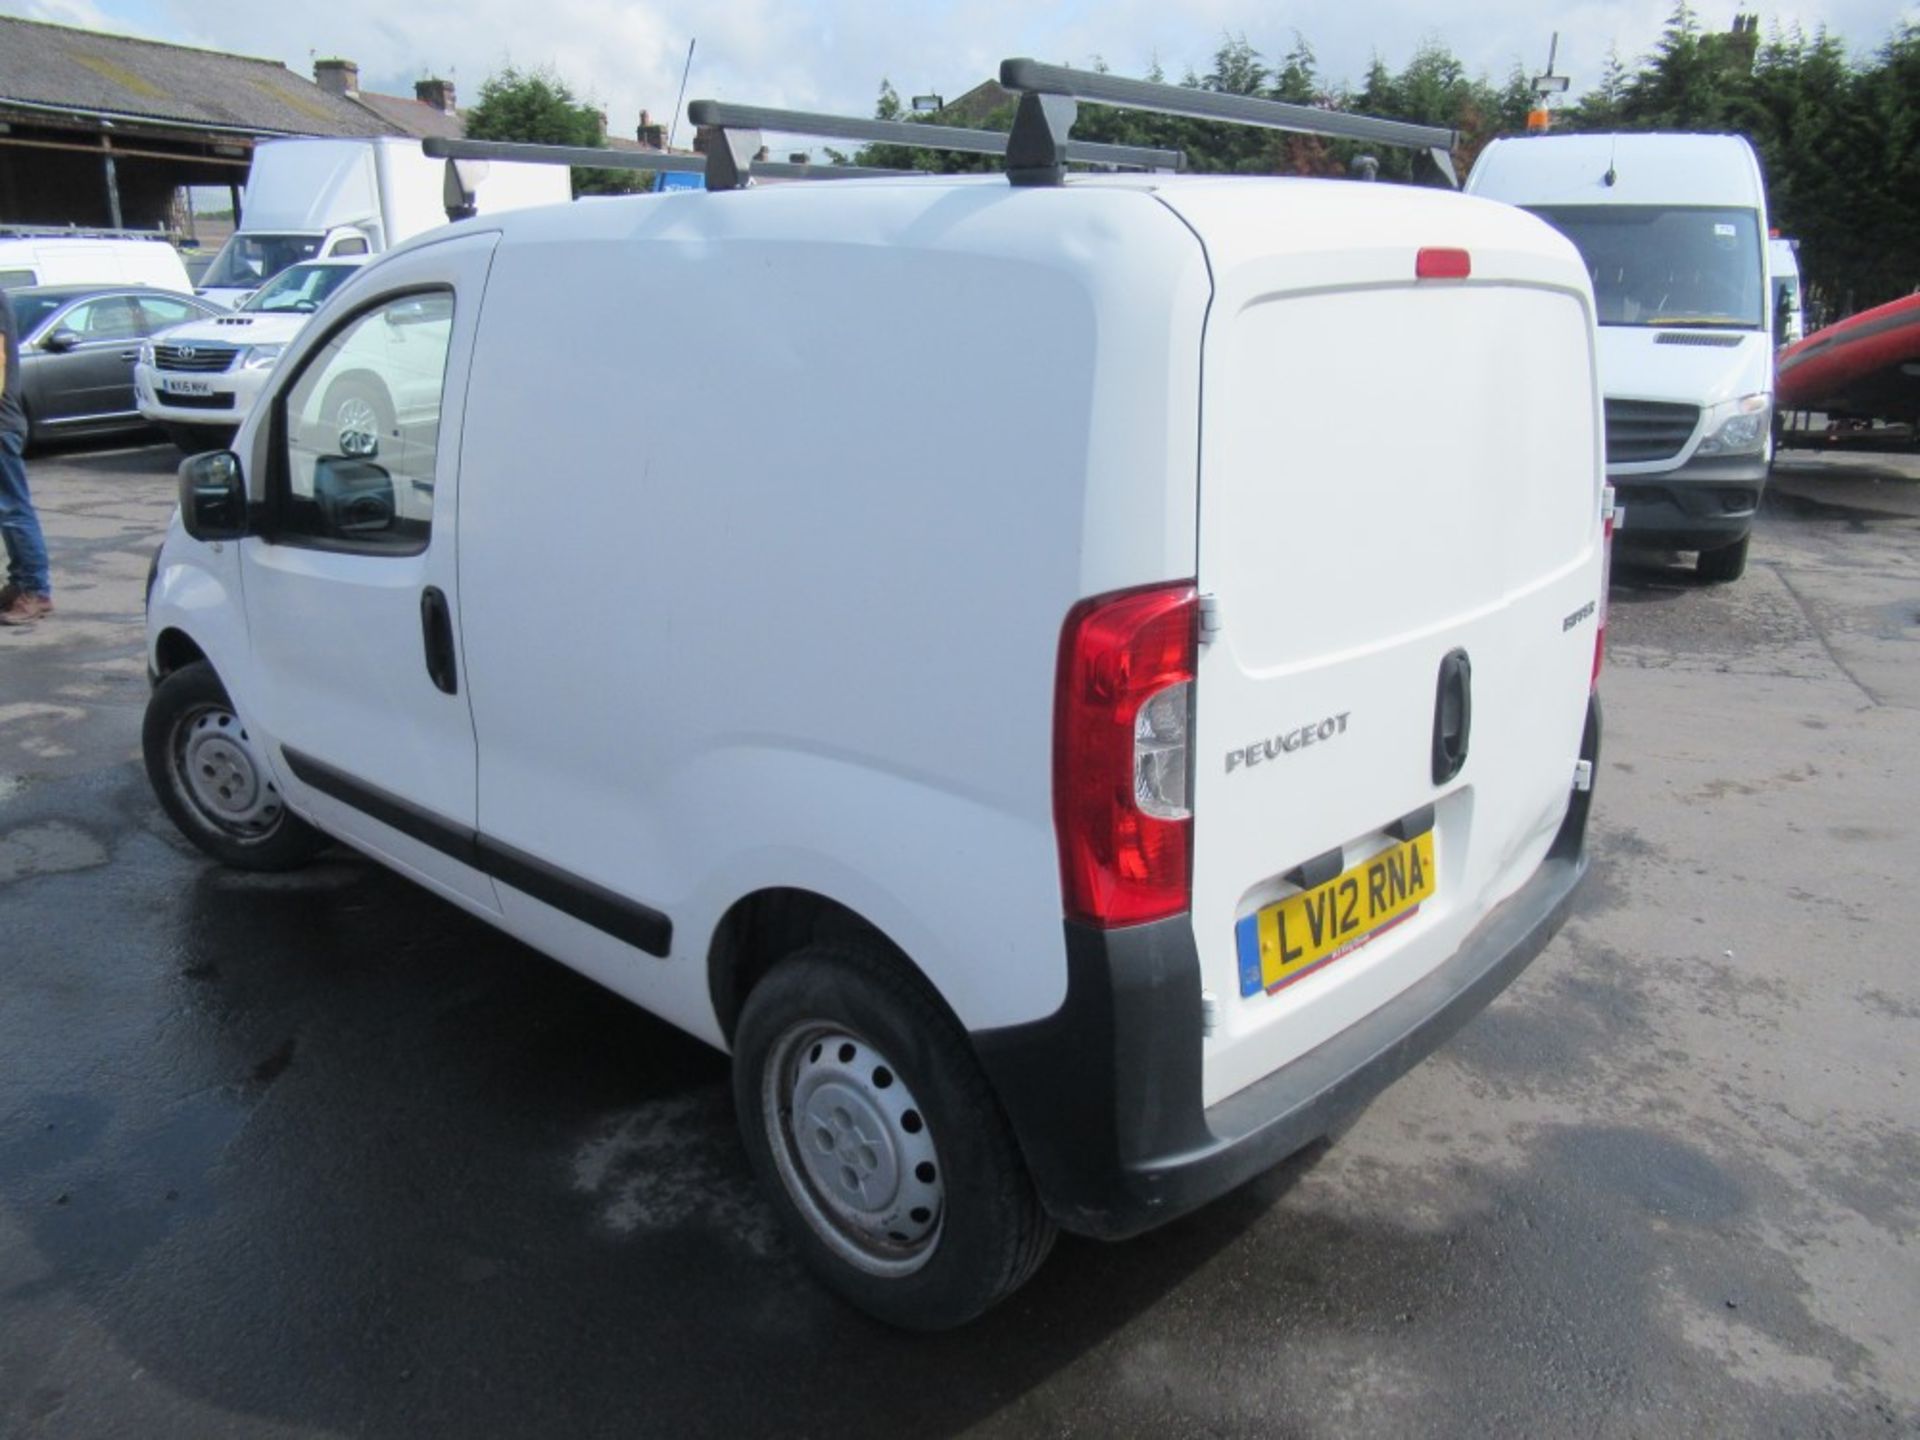 12 reg PEUGEOT BIPPER S HDI VAN, 1ST REG 04/12, TEST 09/19, 65875M, V5 HERE, 4 FORMER KEEPERS [NO - Image 3 of 5